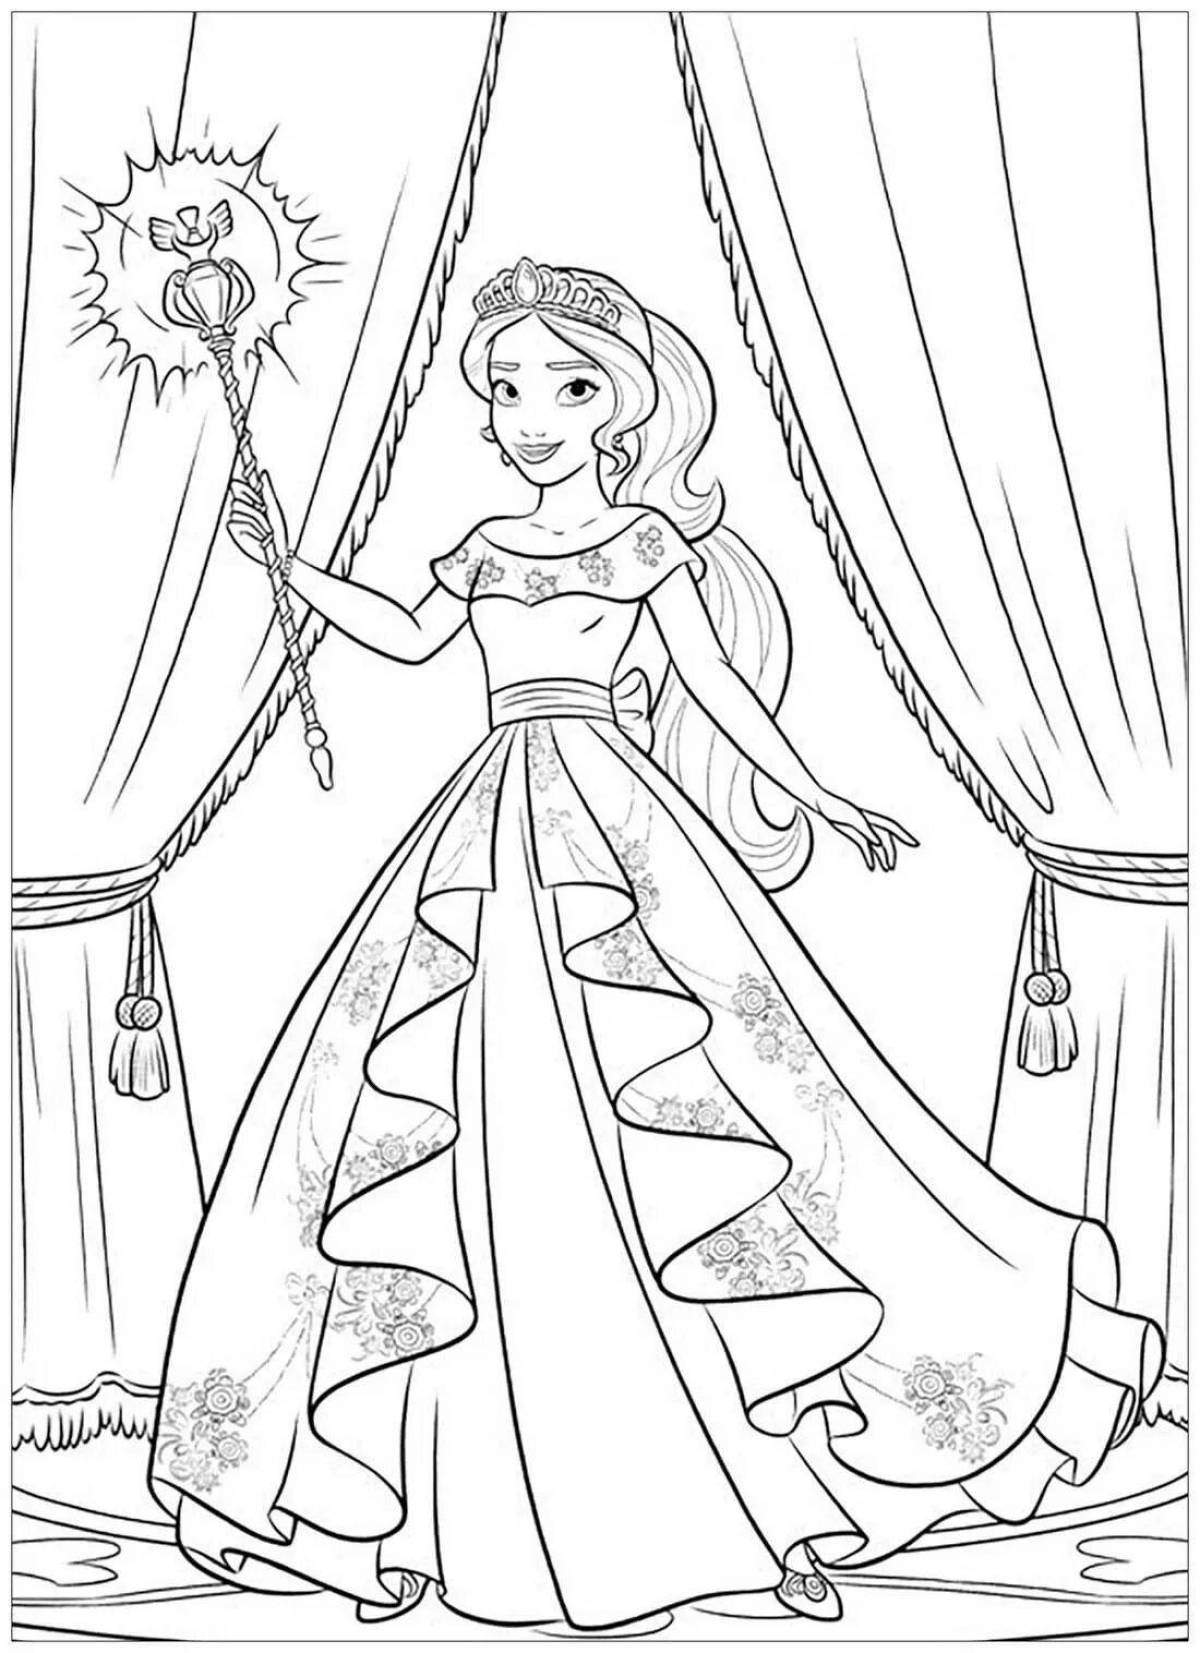 Dazzling elena lovely coloring book